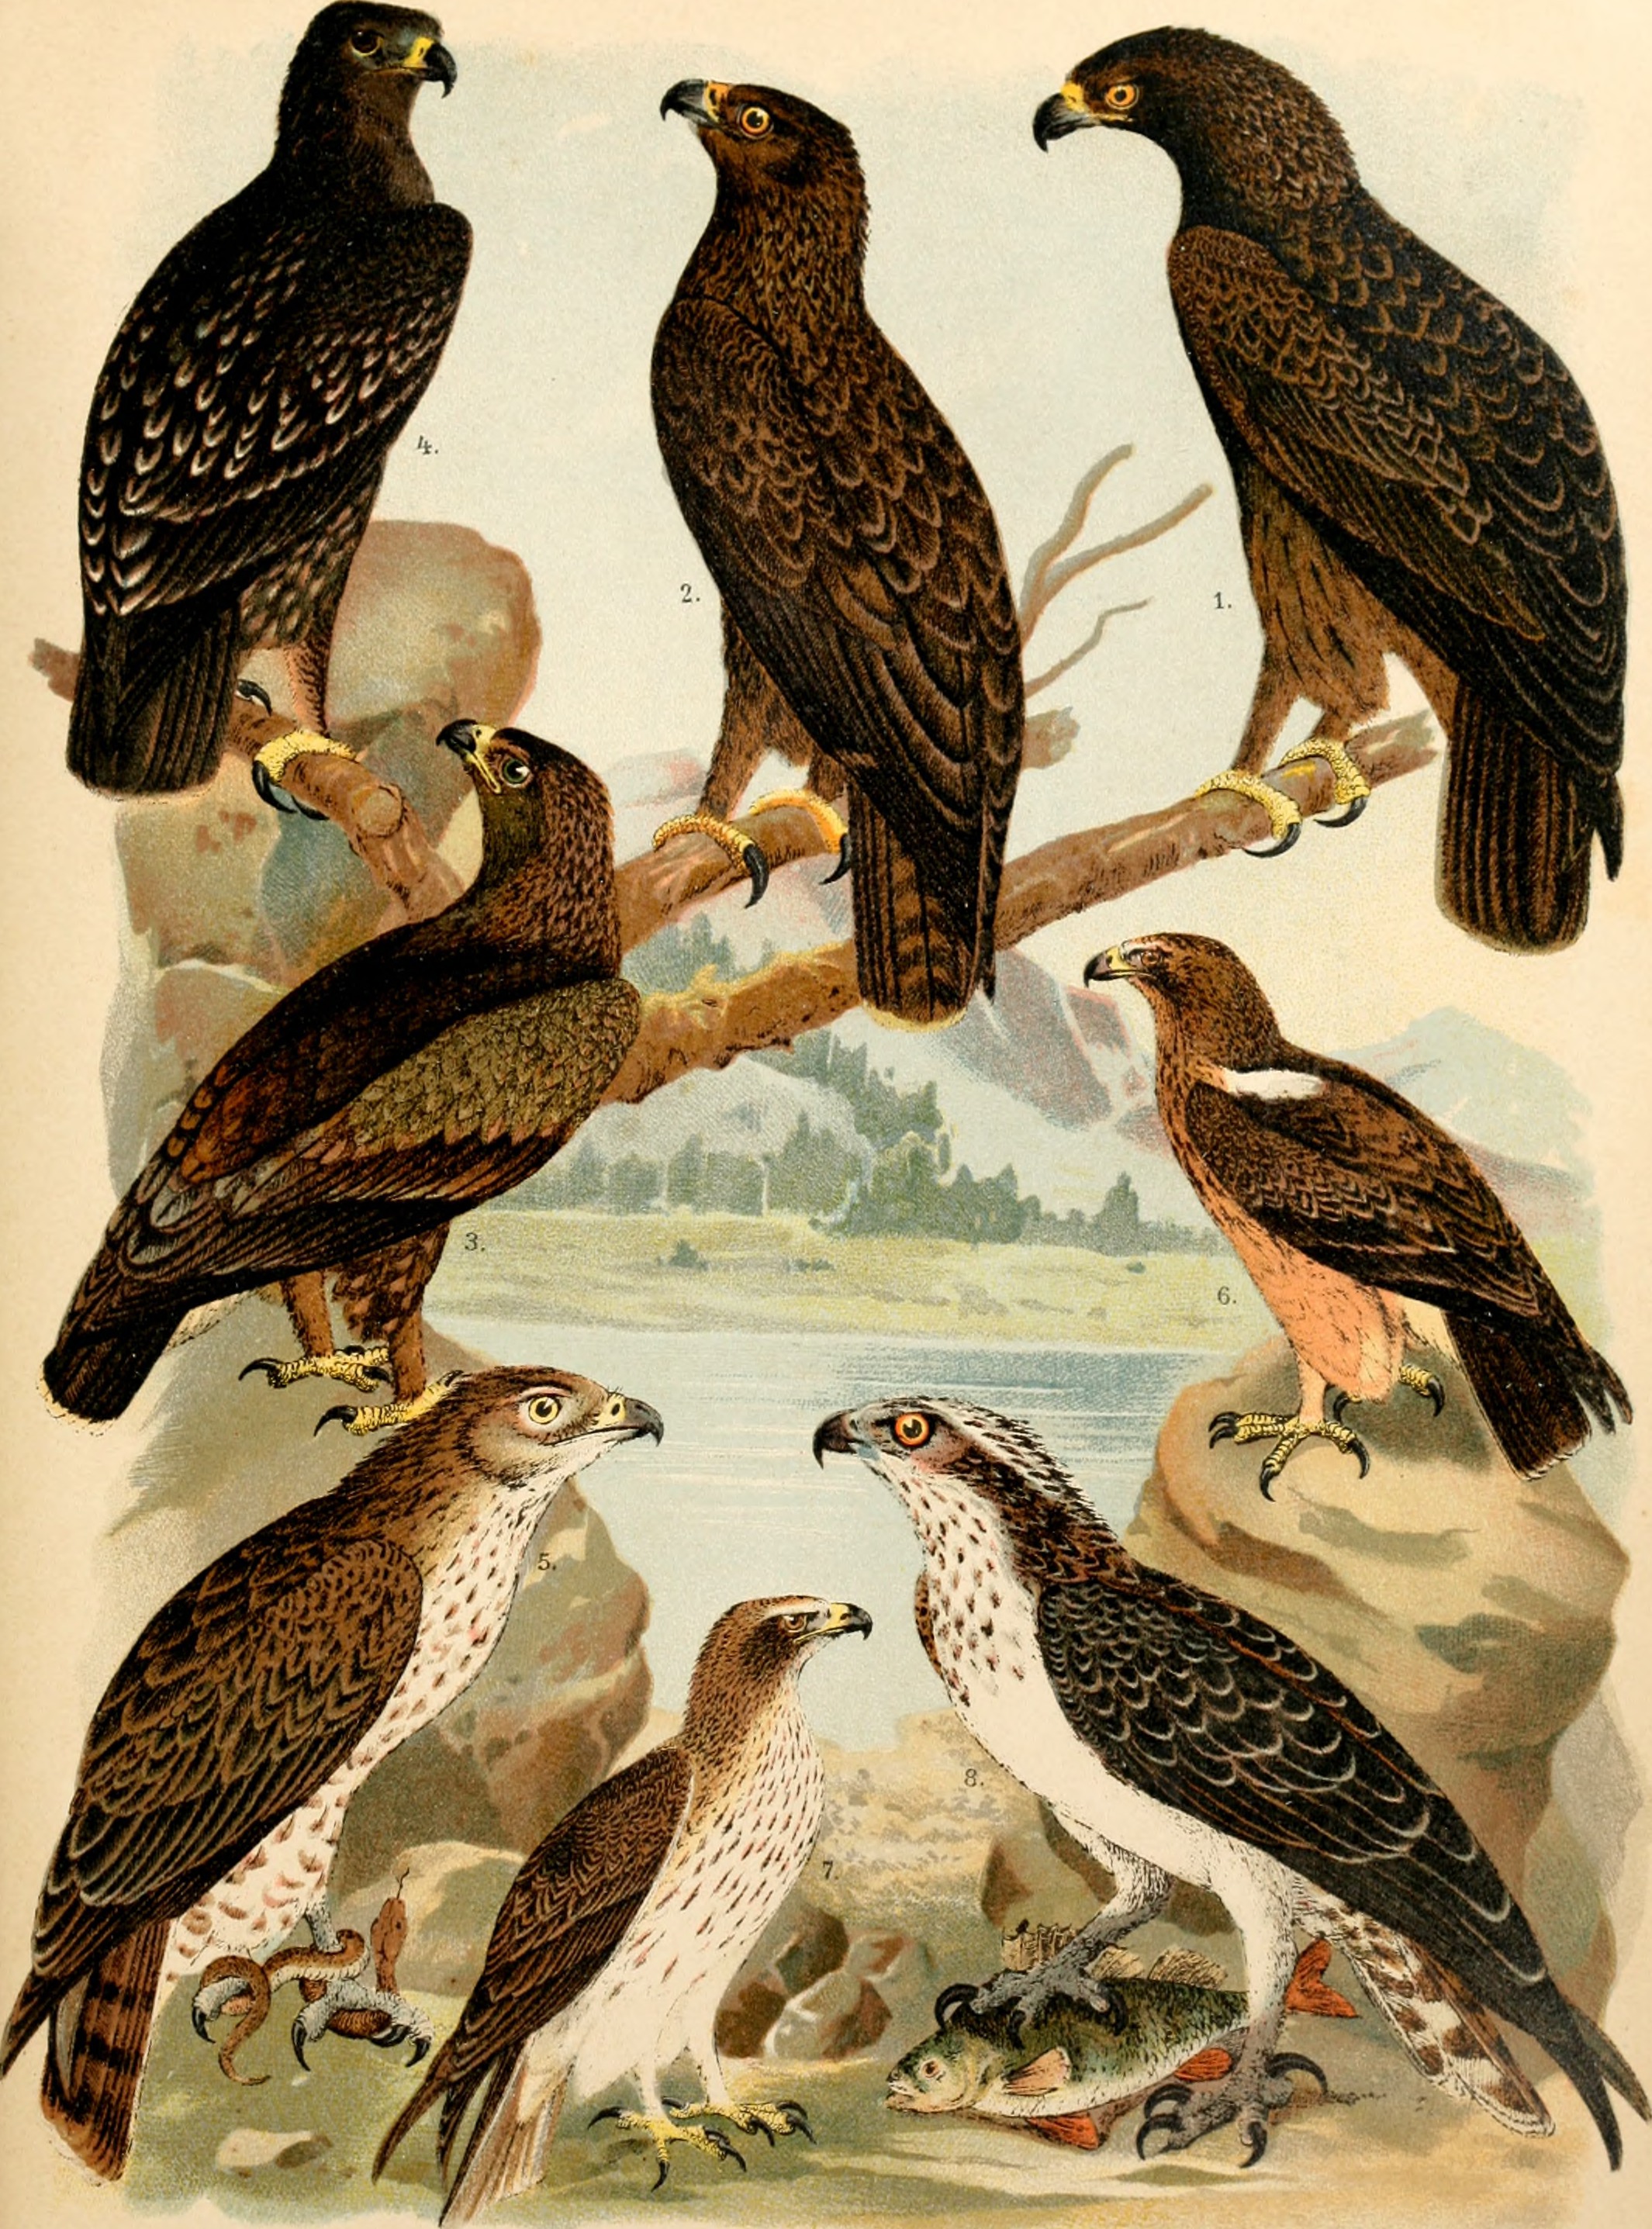 greater spotted eagle (Clanga clanga), lesser spotted eagle (Clanga pomarina), booted eagle (Hieraaetus pennatus), osprey (Pandion haliaetus); Image ONLY